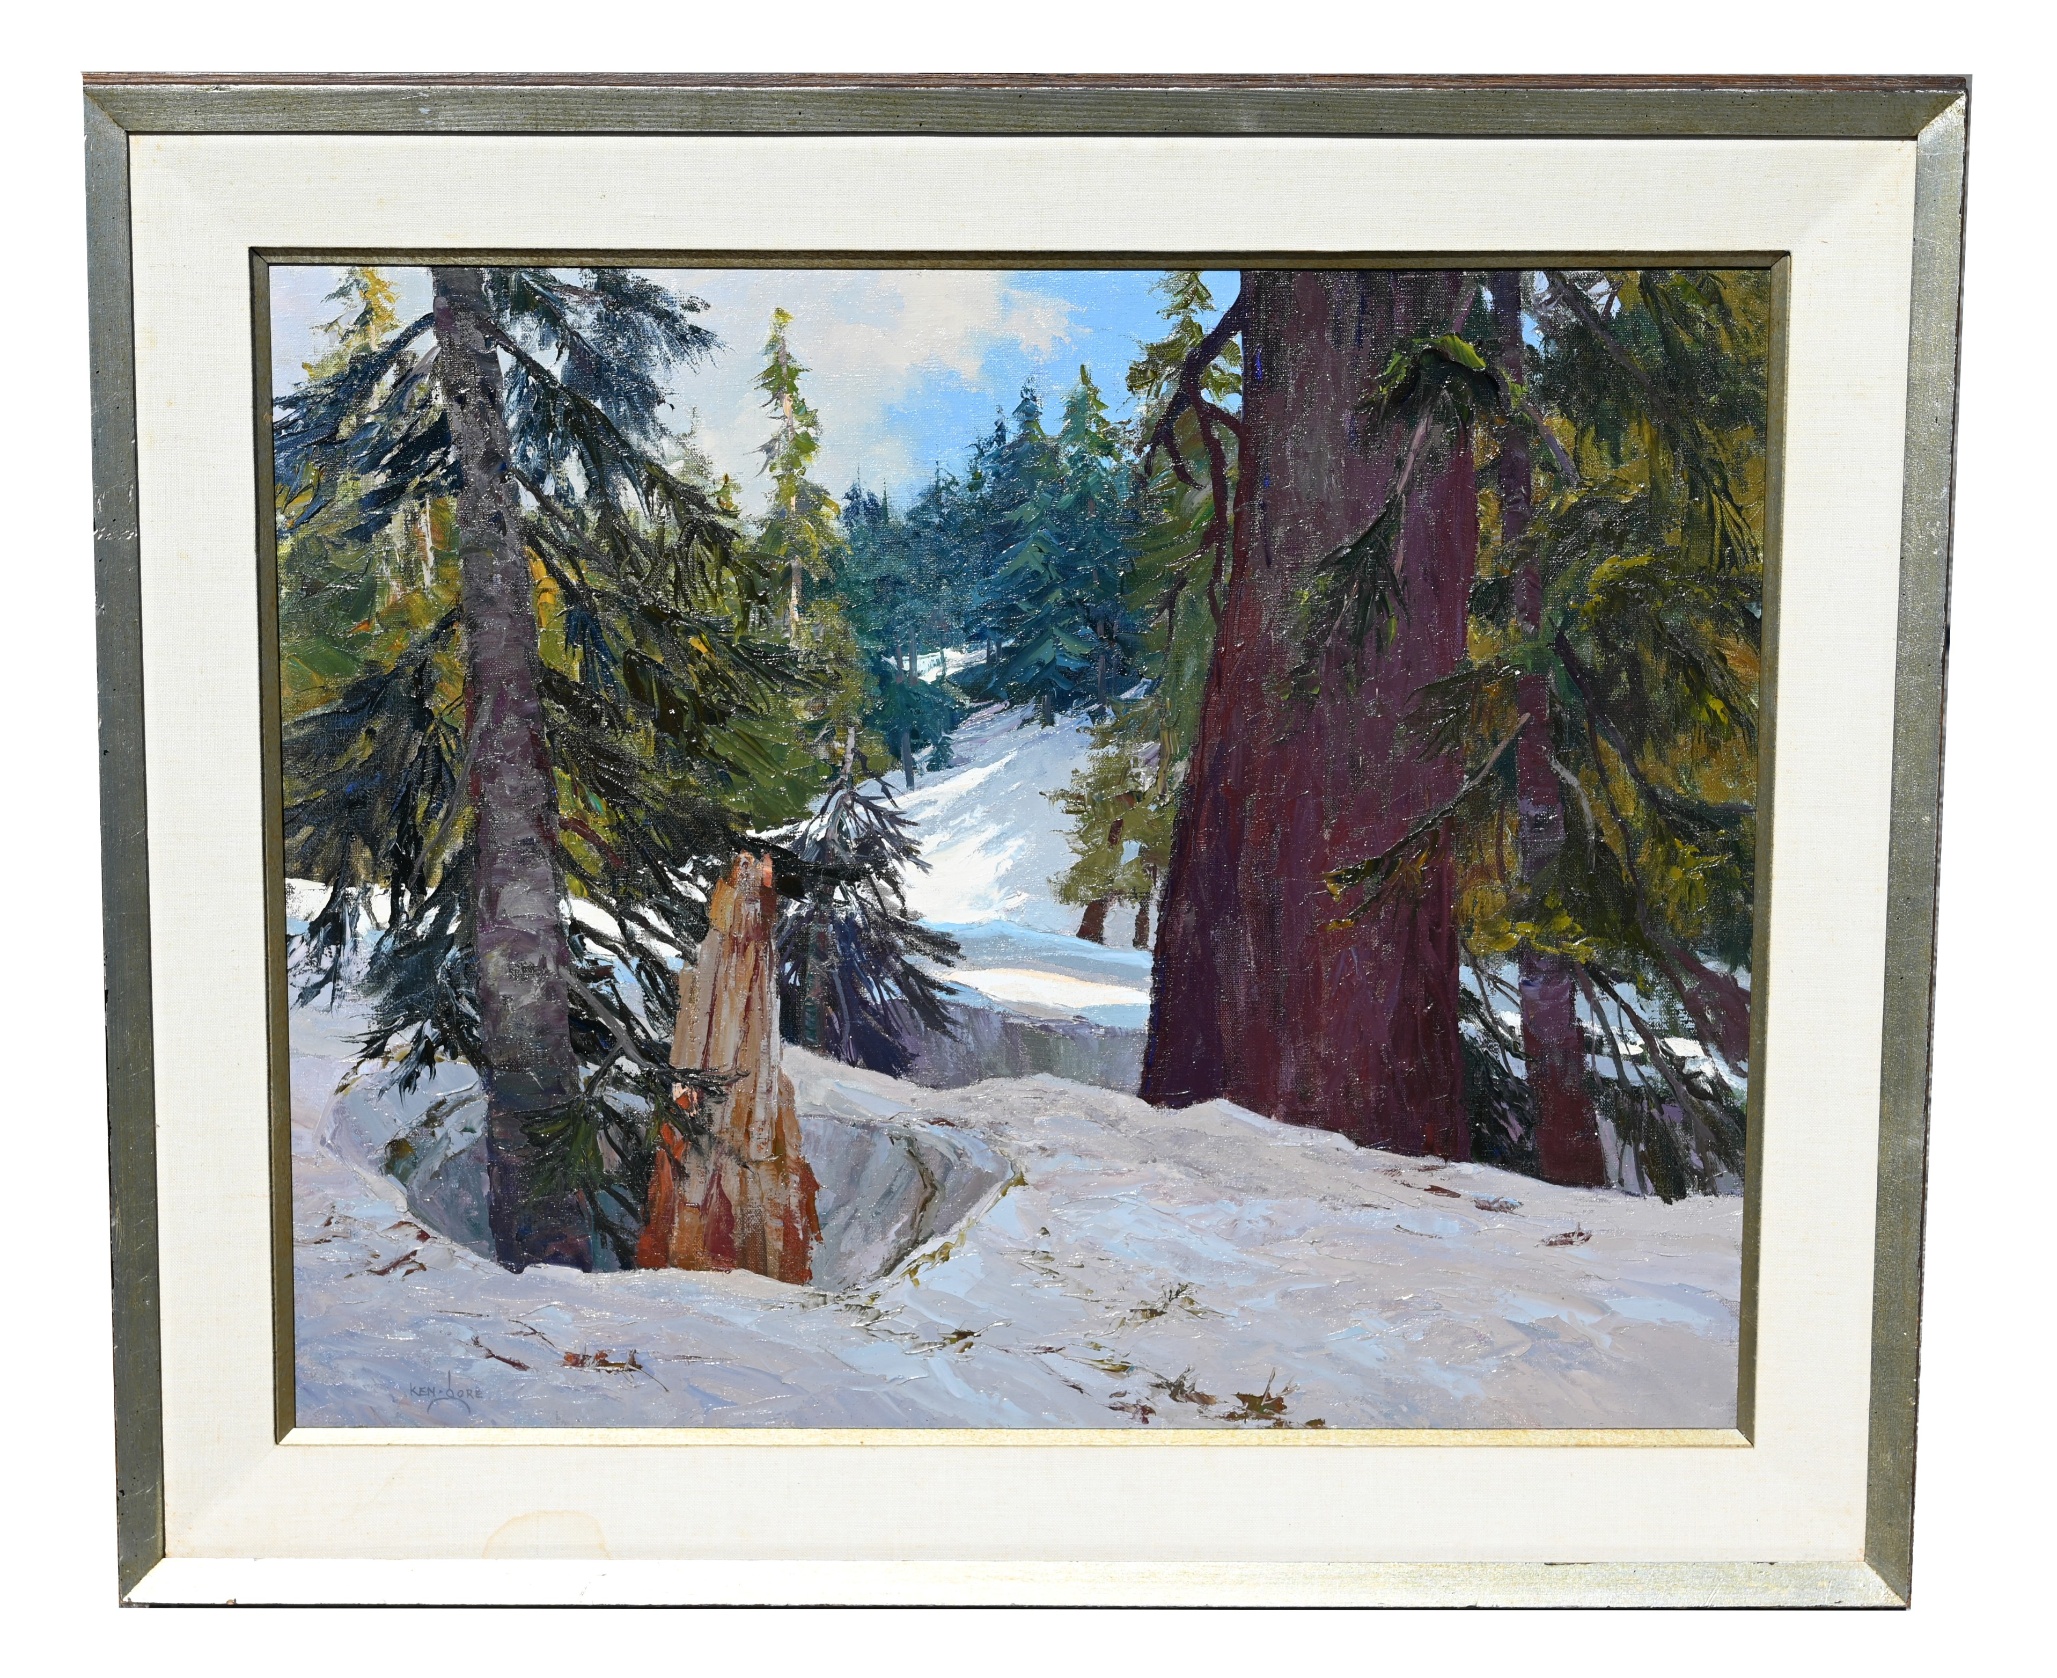 Ken Gore (1911 - 1990) "Snow at Cayuse Pass" - Image 2 of 8